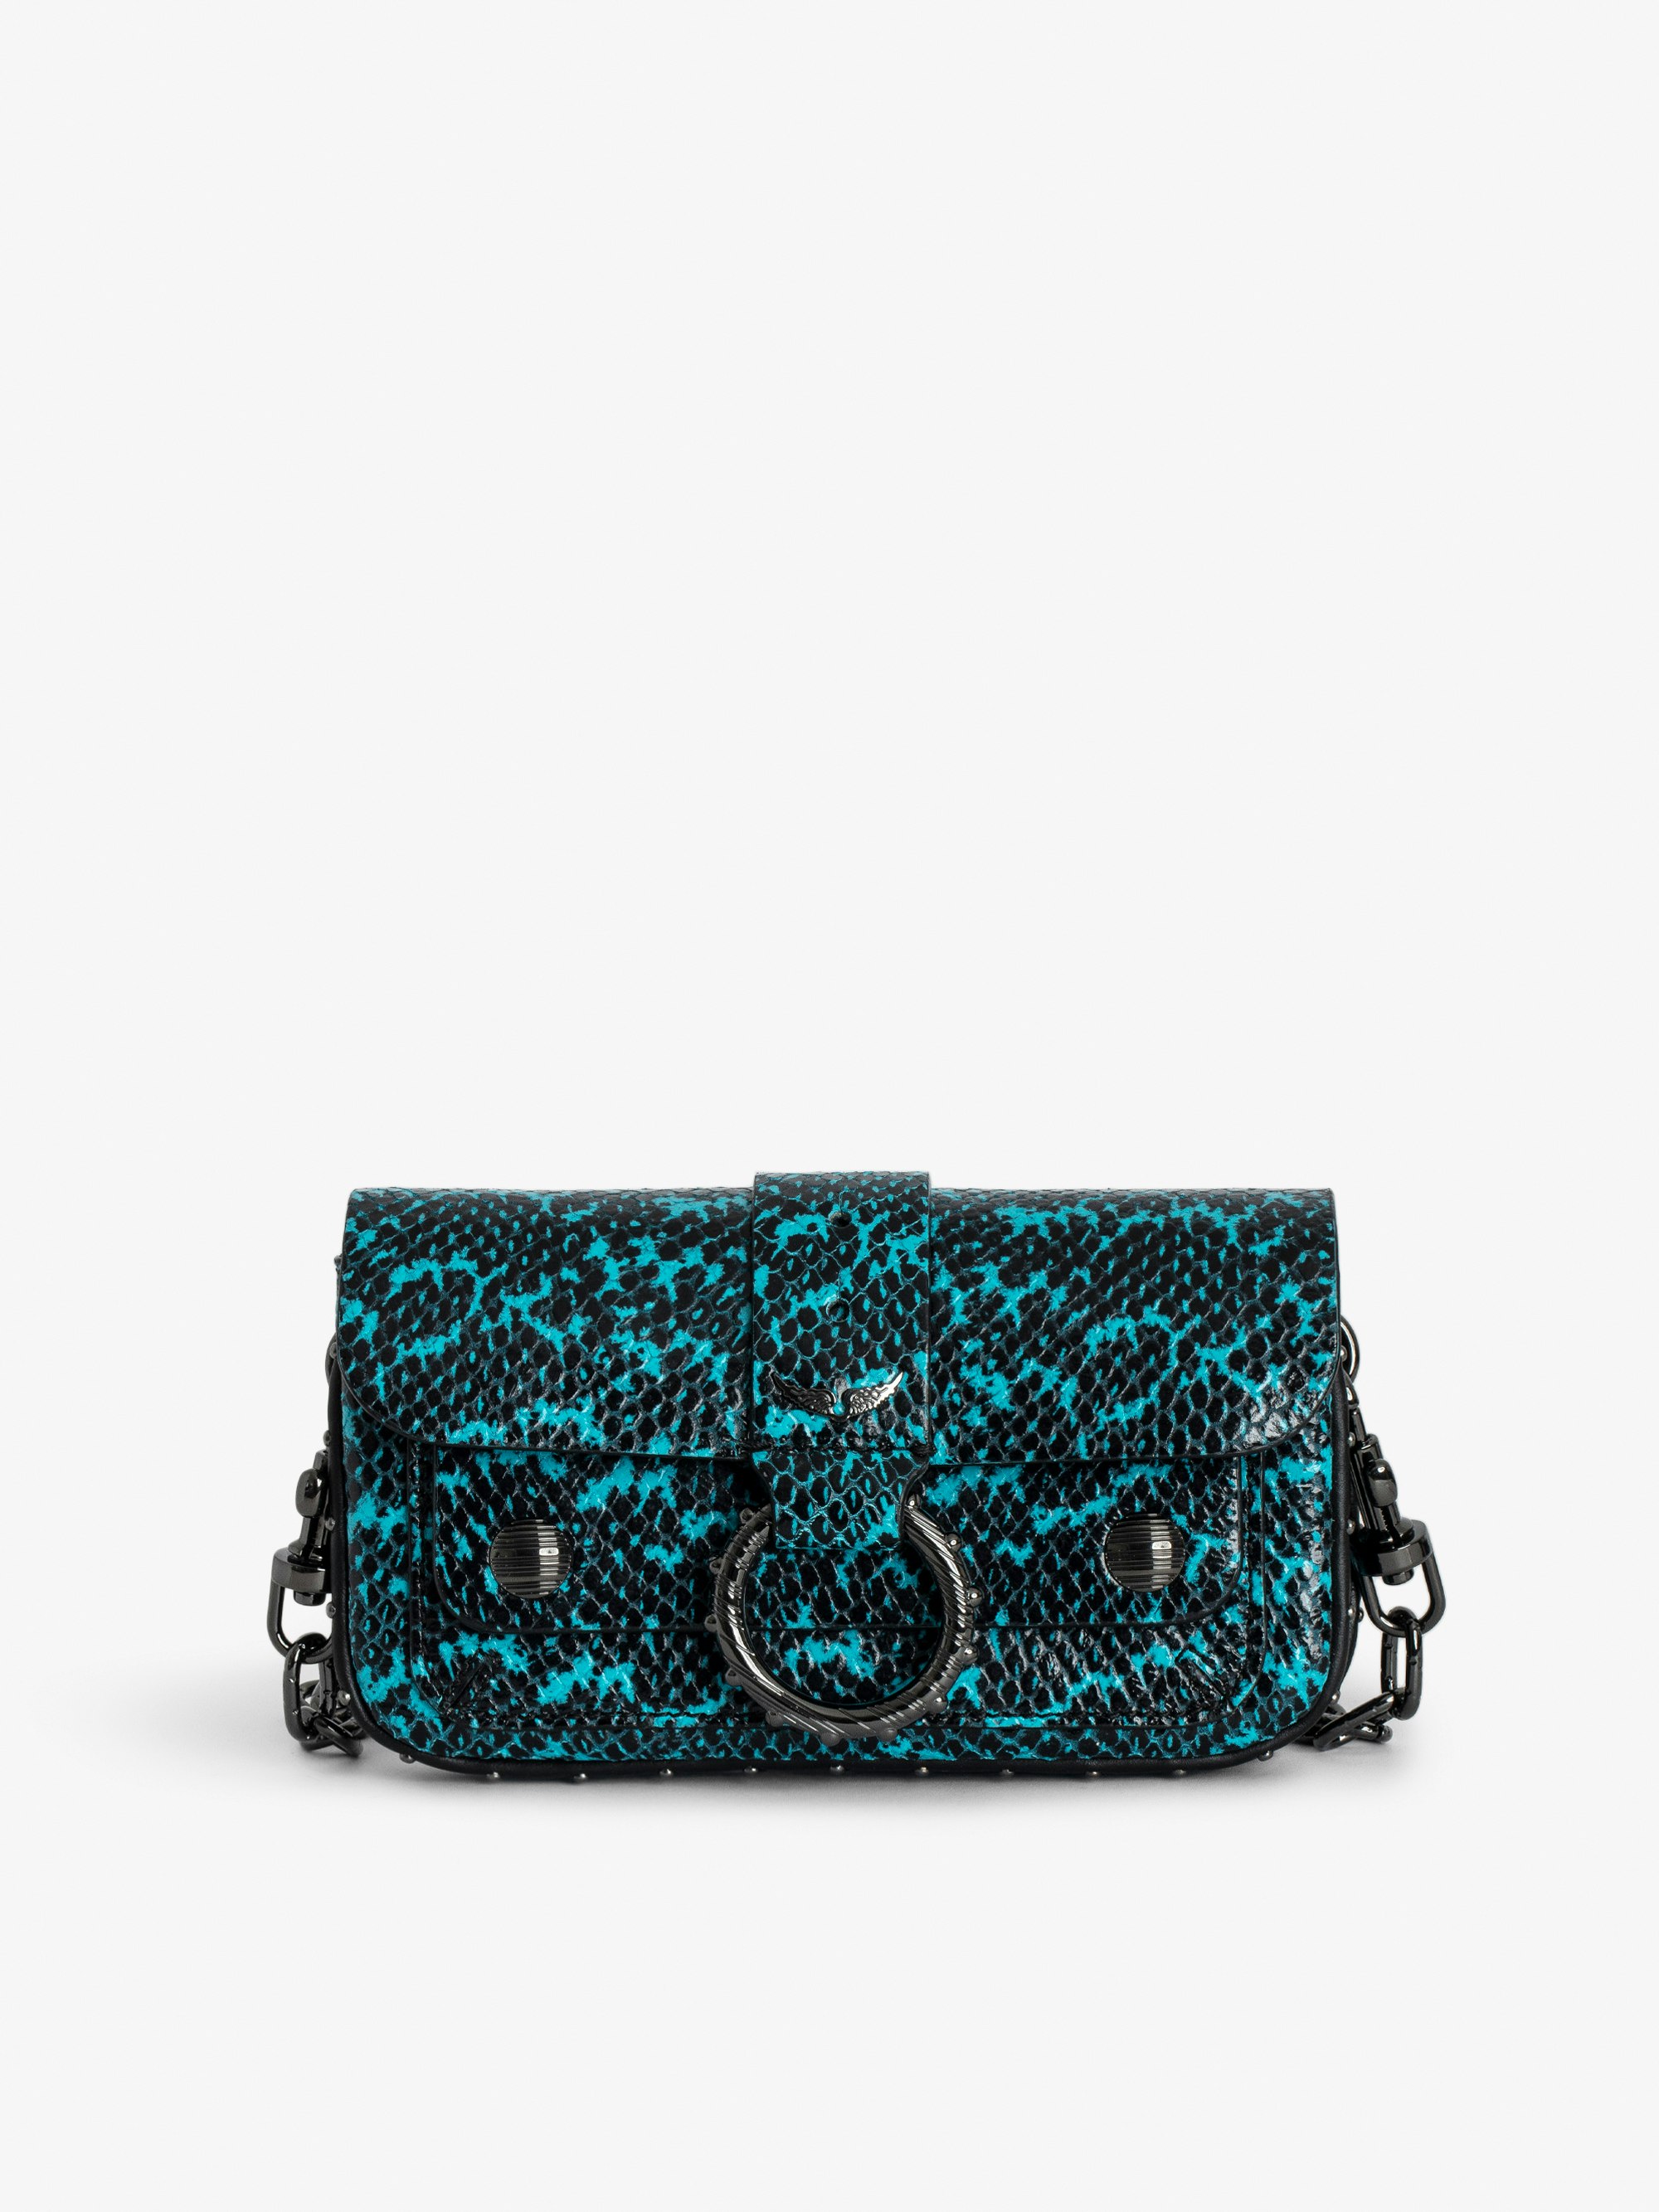 Kate Wallet Wild Bag - Blue snakeskin-effect leather mini bag with ring and chain.